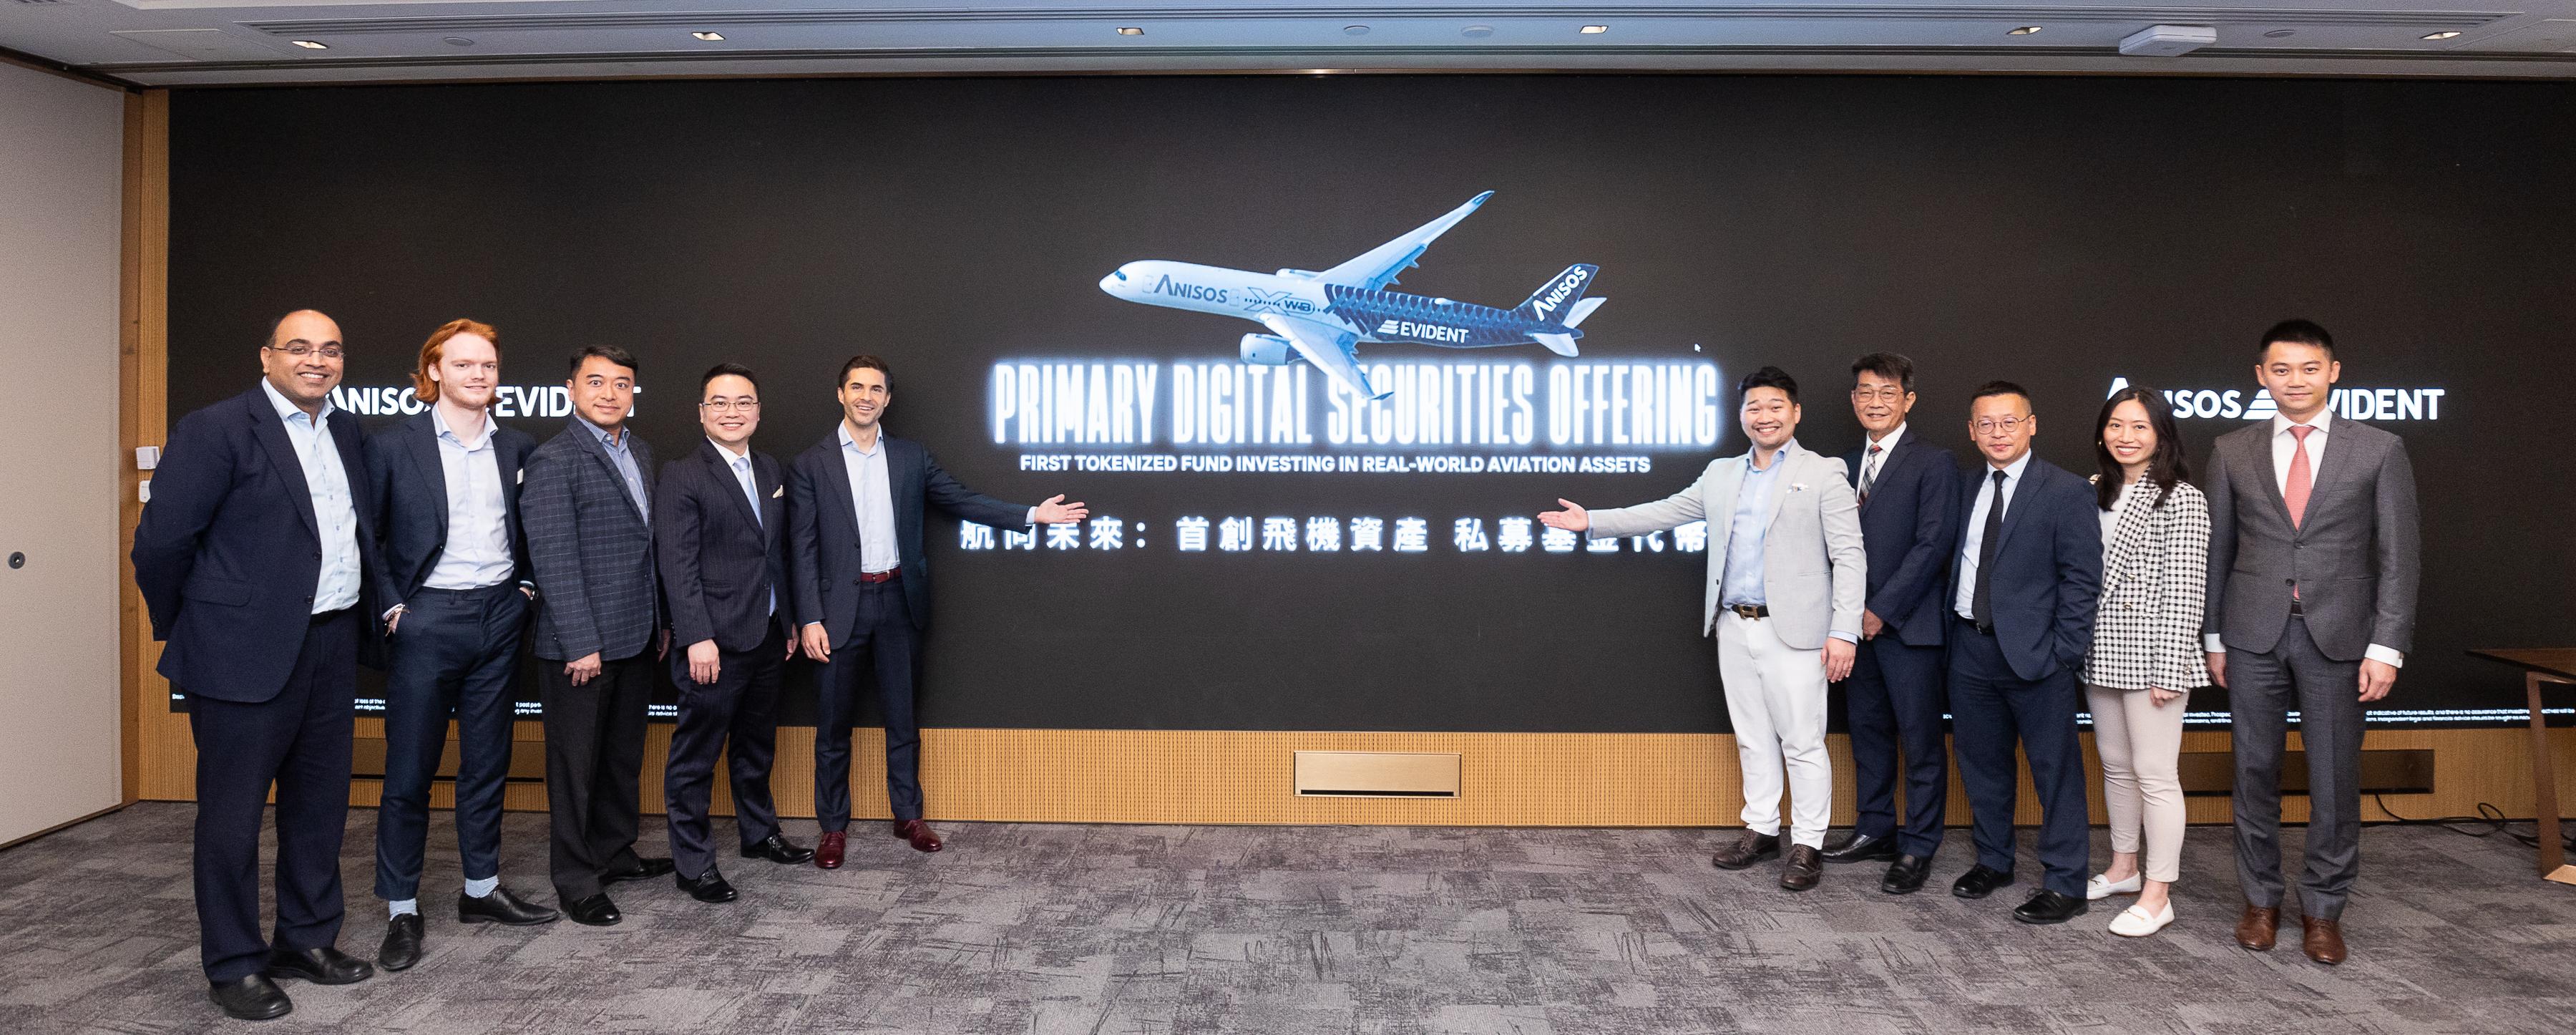 Invest Hong Kong announced today (February 5) that it has assisted a licensed fintech company, Evident Platform Services Limited (EVIDENT), to set up its global headquarters in Hong Kong, offering the world's first tokenised private limited partnership fund investing in the aviation sector, in partnership with Anisos Capital Group. Photo shows (from left) Partner of Tiang & Partners Mr Tejaswi Nimmagadda; the Head of Business Operations, EVIDENT, Mr Thomas Gijsels; the Head of Fund Admin and Custody, EVIDENT, Mr Kenneth Li; the Head of Investment Solutions, EVIDENT, Mr Manton Wai; the Founder and CEO, EVIDENT, Dr Florian Spiegl; the CEO of Anisos Capital Group, Mr Steven Dominique Cheung; the COO of Anisos Capital Group, Captain Simon Wu; the Managing Director, Prosynergy, Mr Louie Lee; and the CFO of Anisos Capital Group, Mr Howard Cheung (first right) at the opening. 